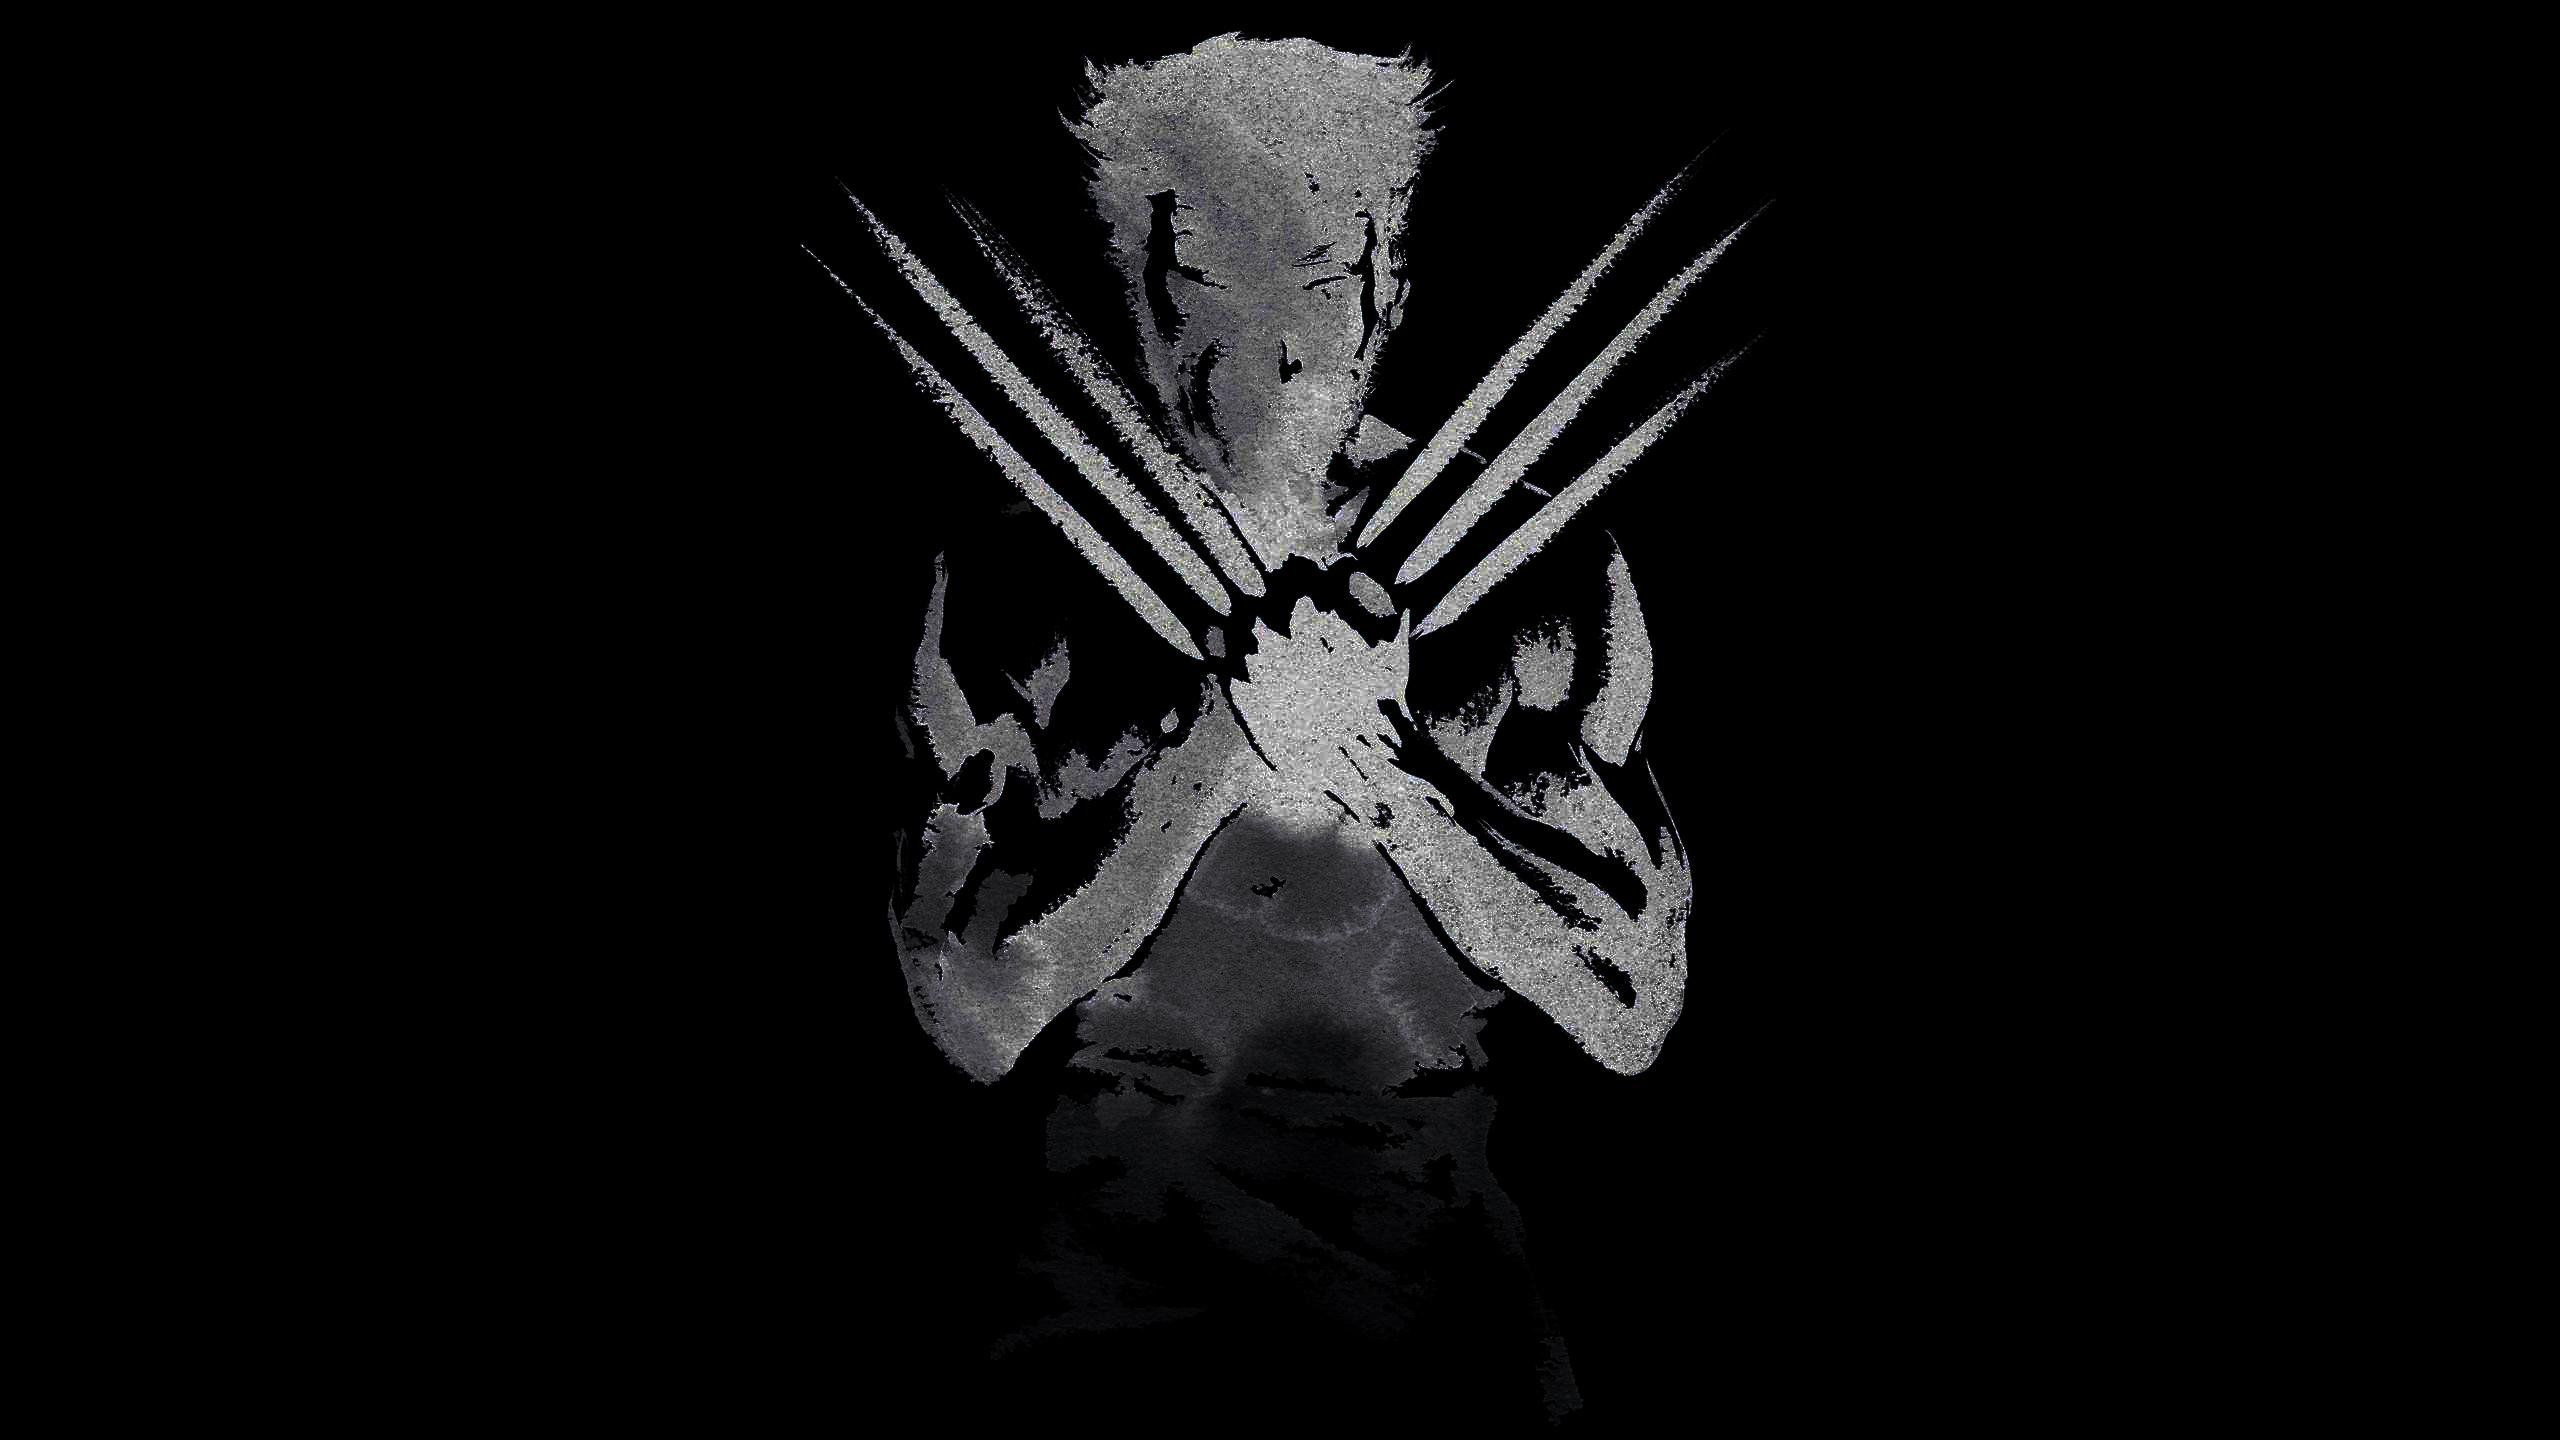 Wolverine 4K wallpaper for your desktop or mobile screen free and easy to download